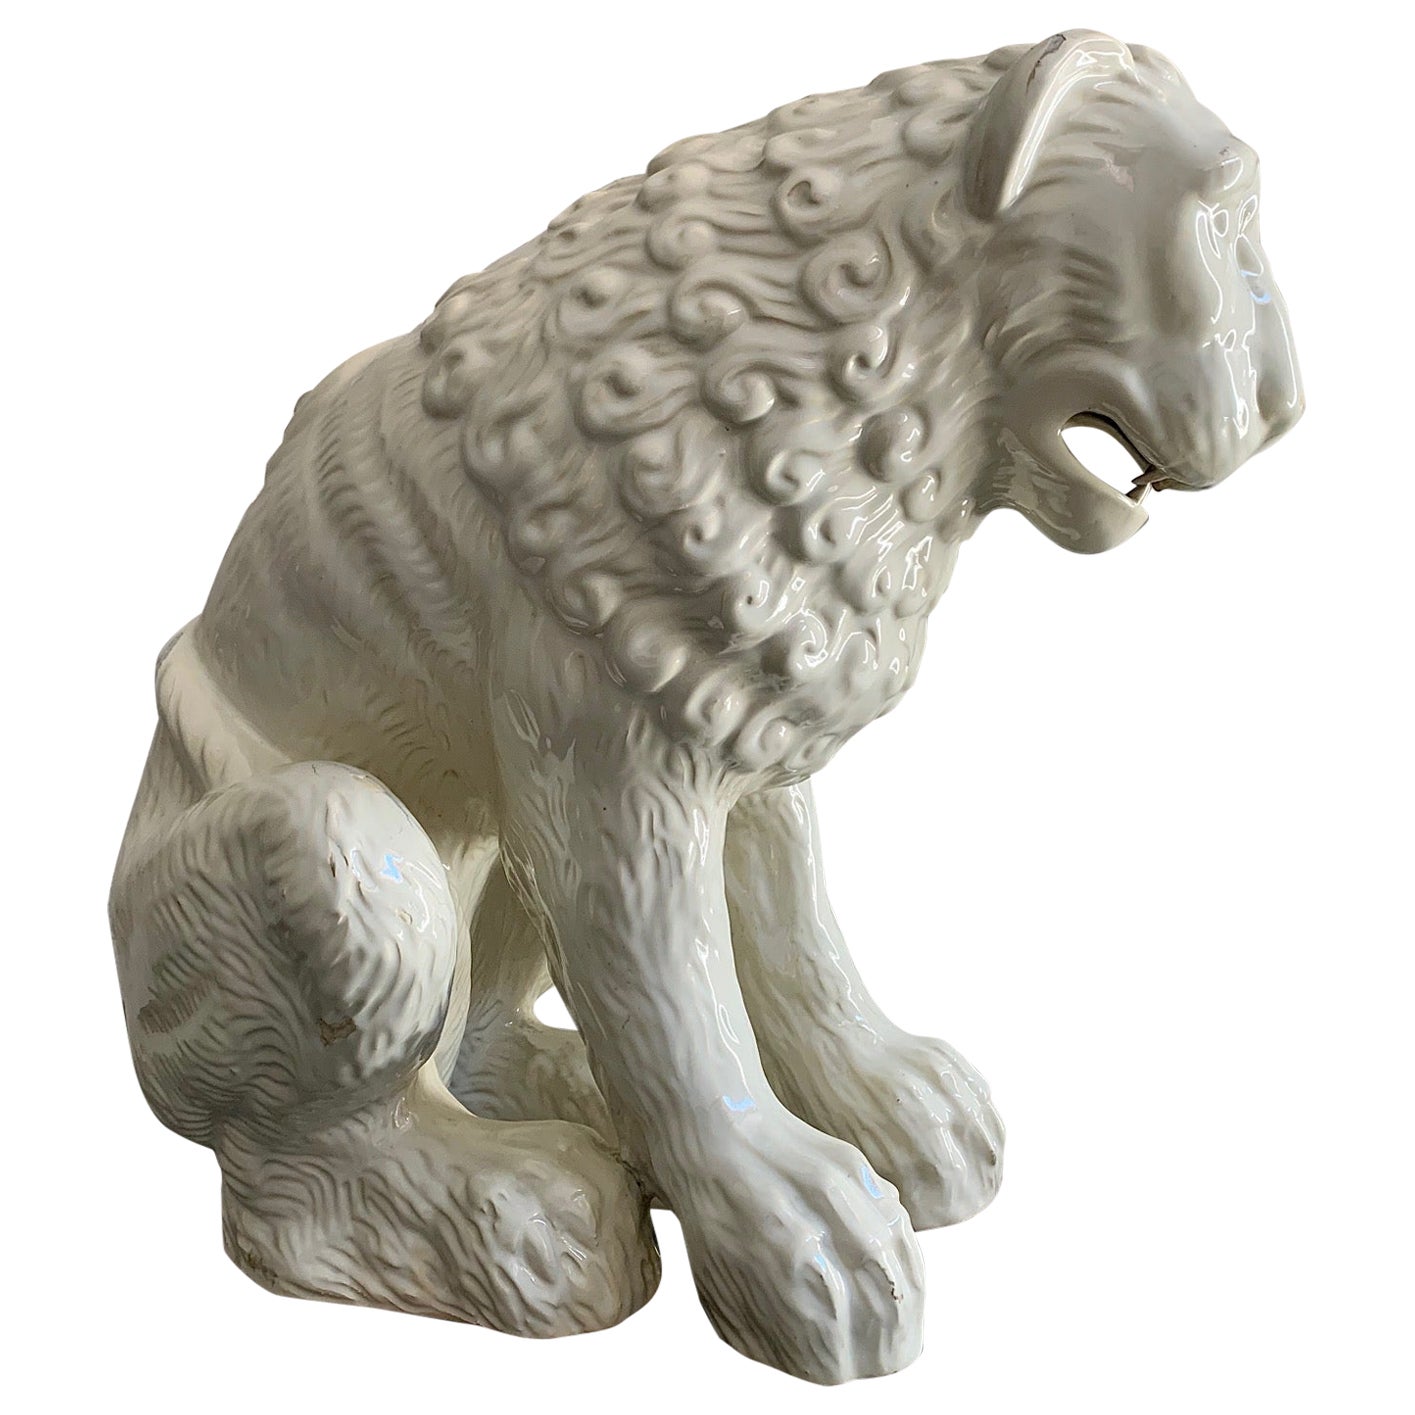 Large Sculpture Whihe Glazed Earthenware Ceramic Lion For Sale